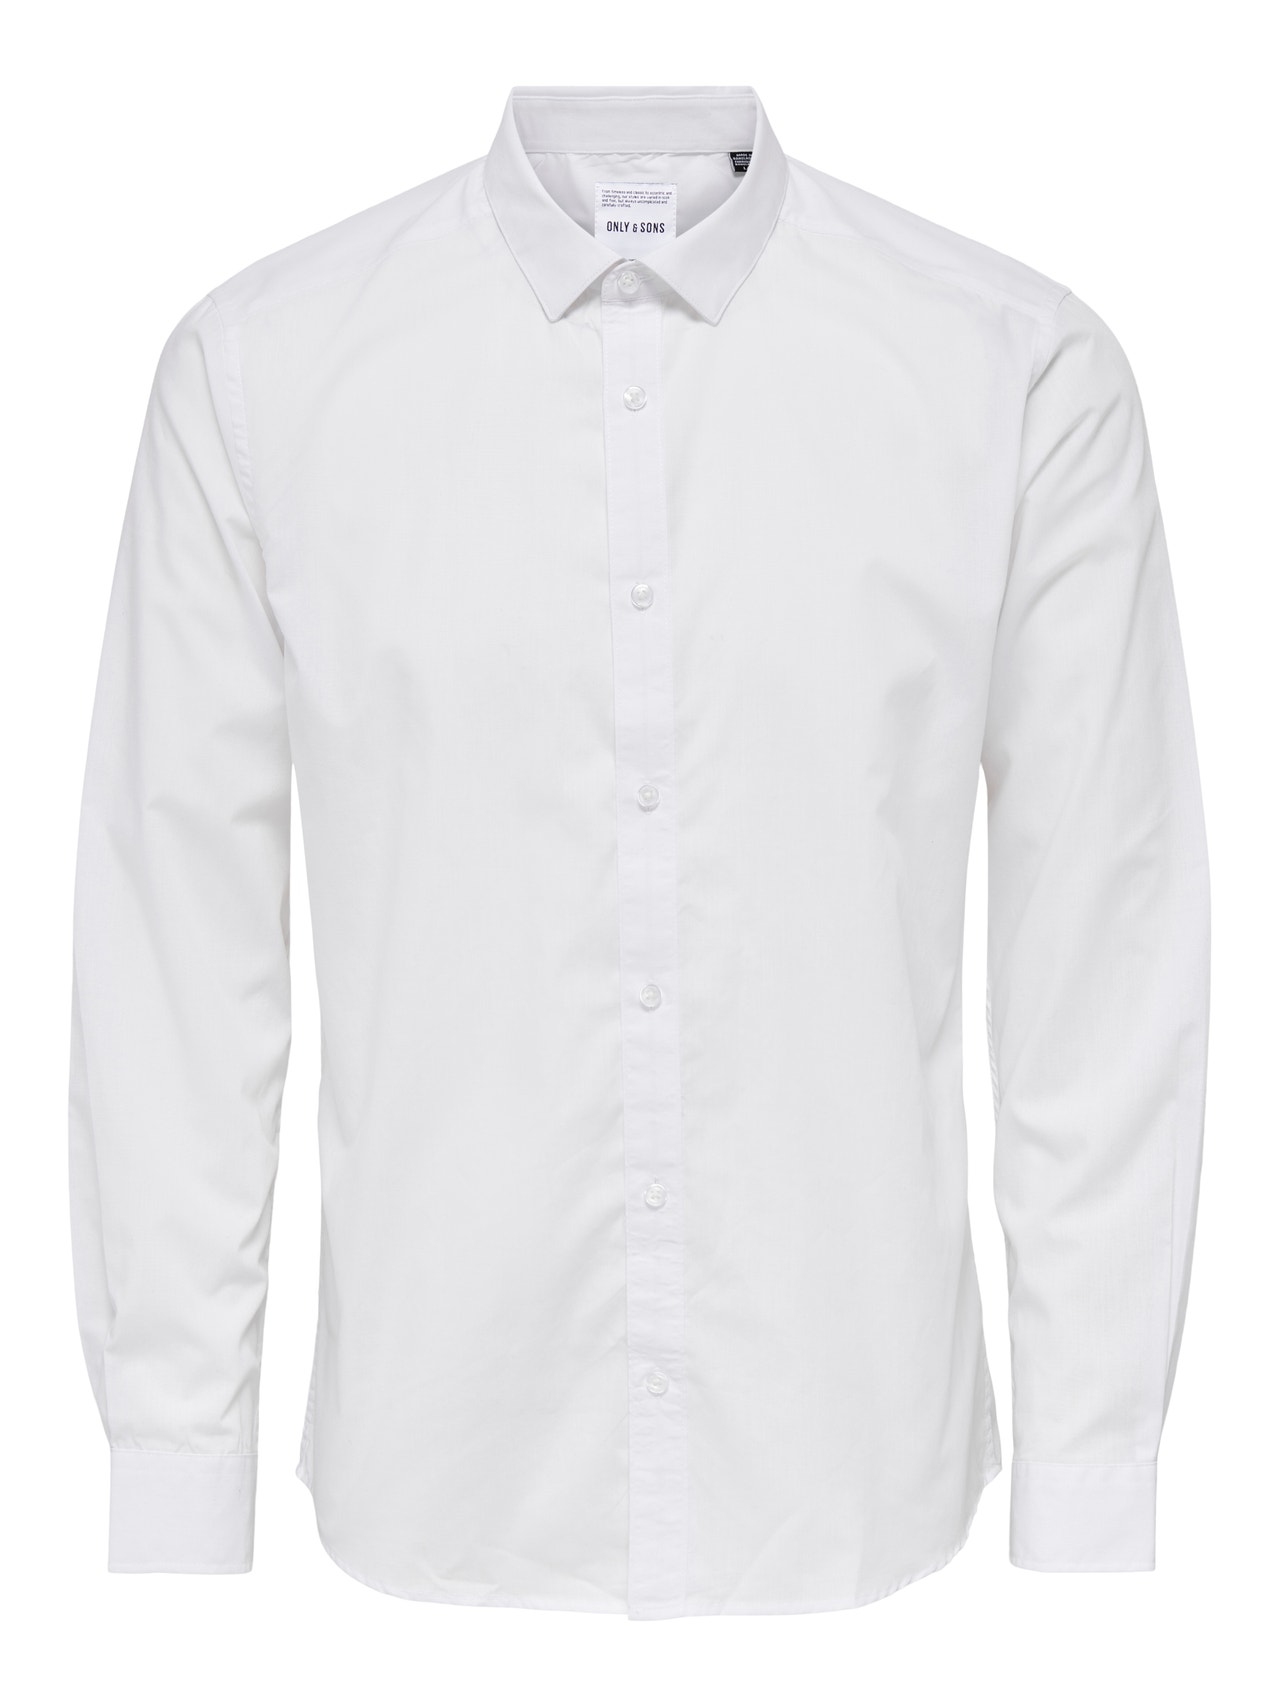 ONLY & SONS Classic shirt -White - 22015472